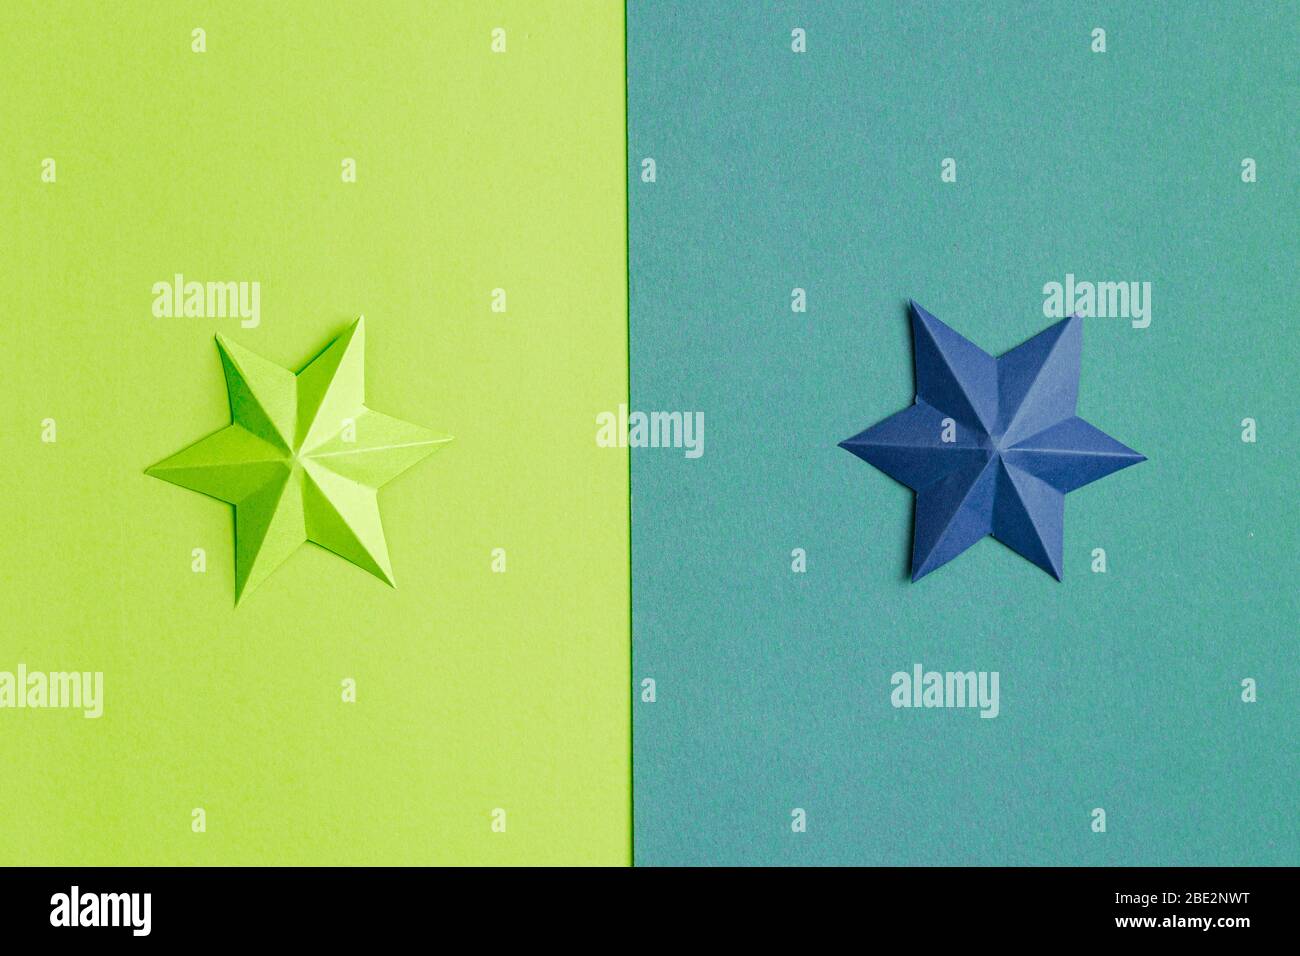 Colored paper stars over different background Stock Photo